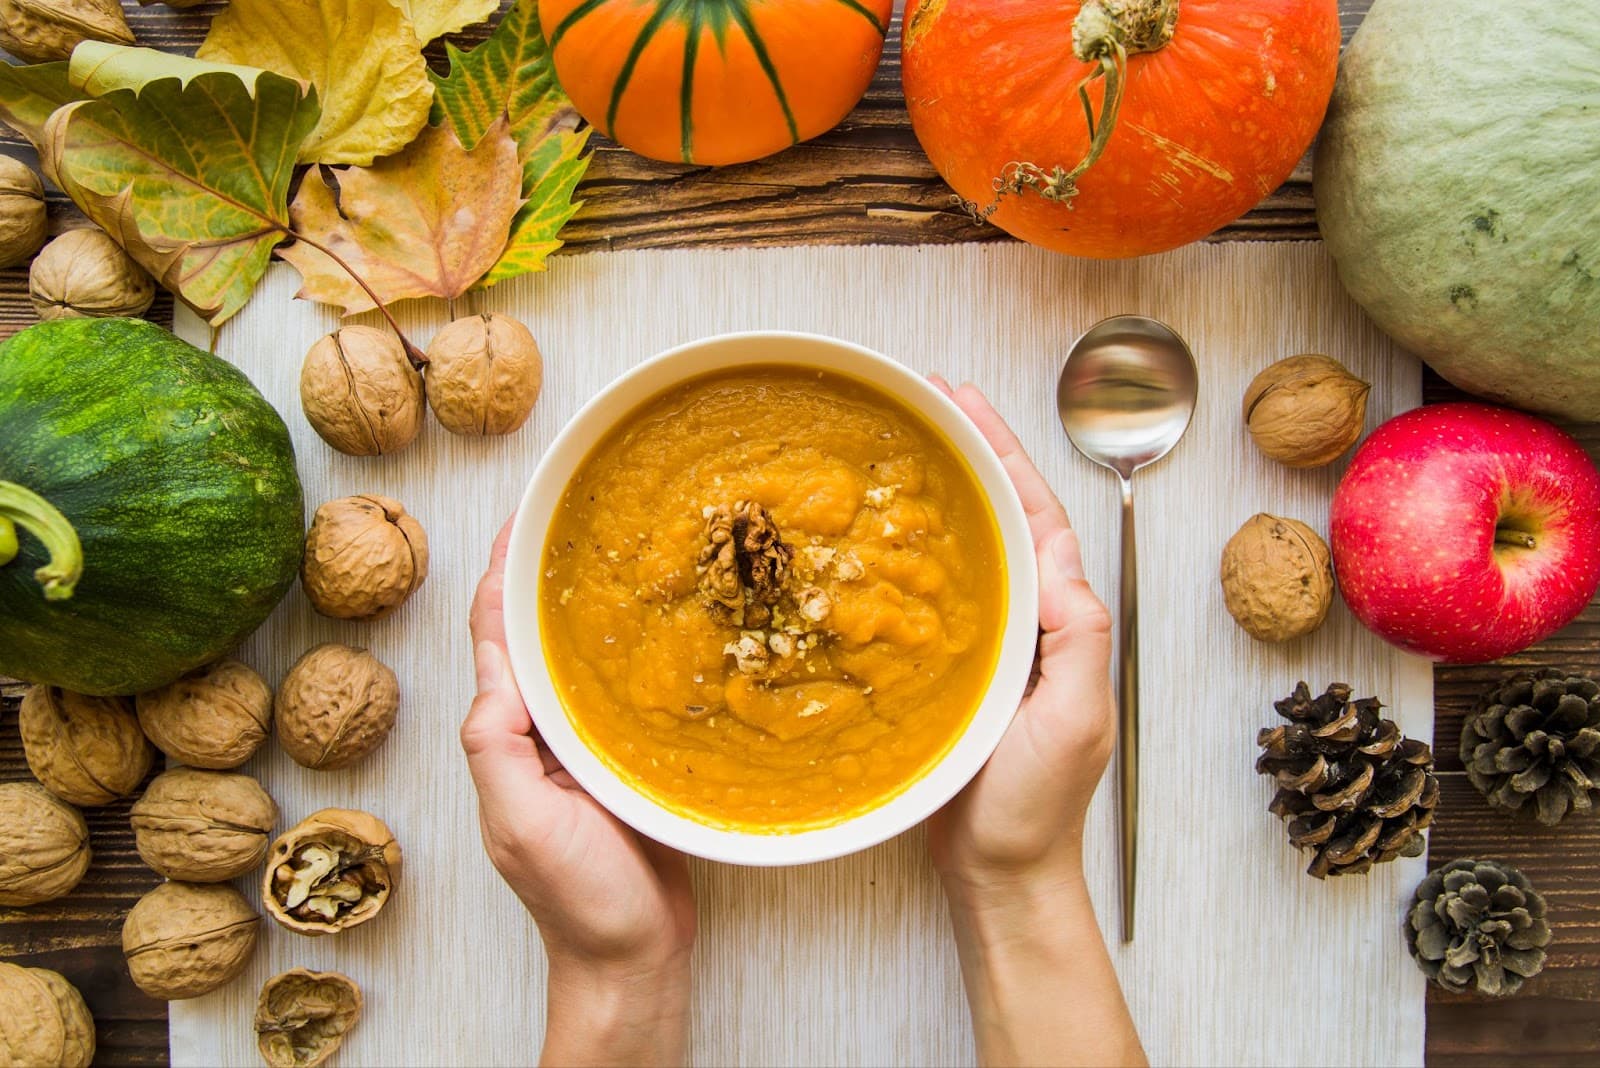 Top view of hands holding bowl of pumpkin soup with walnuts